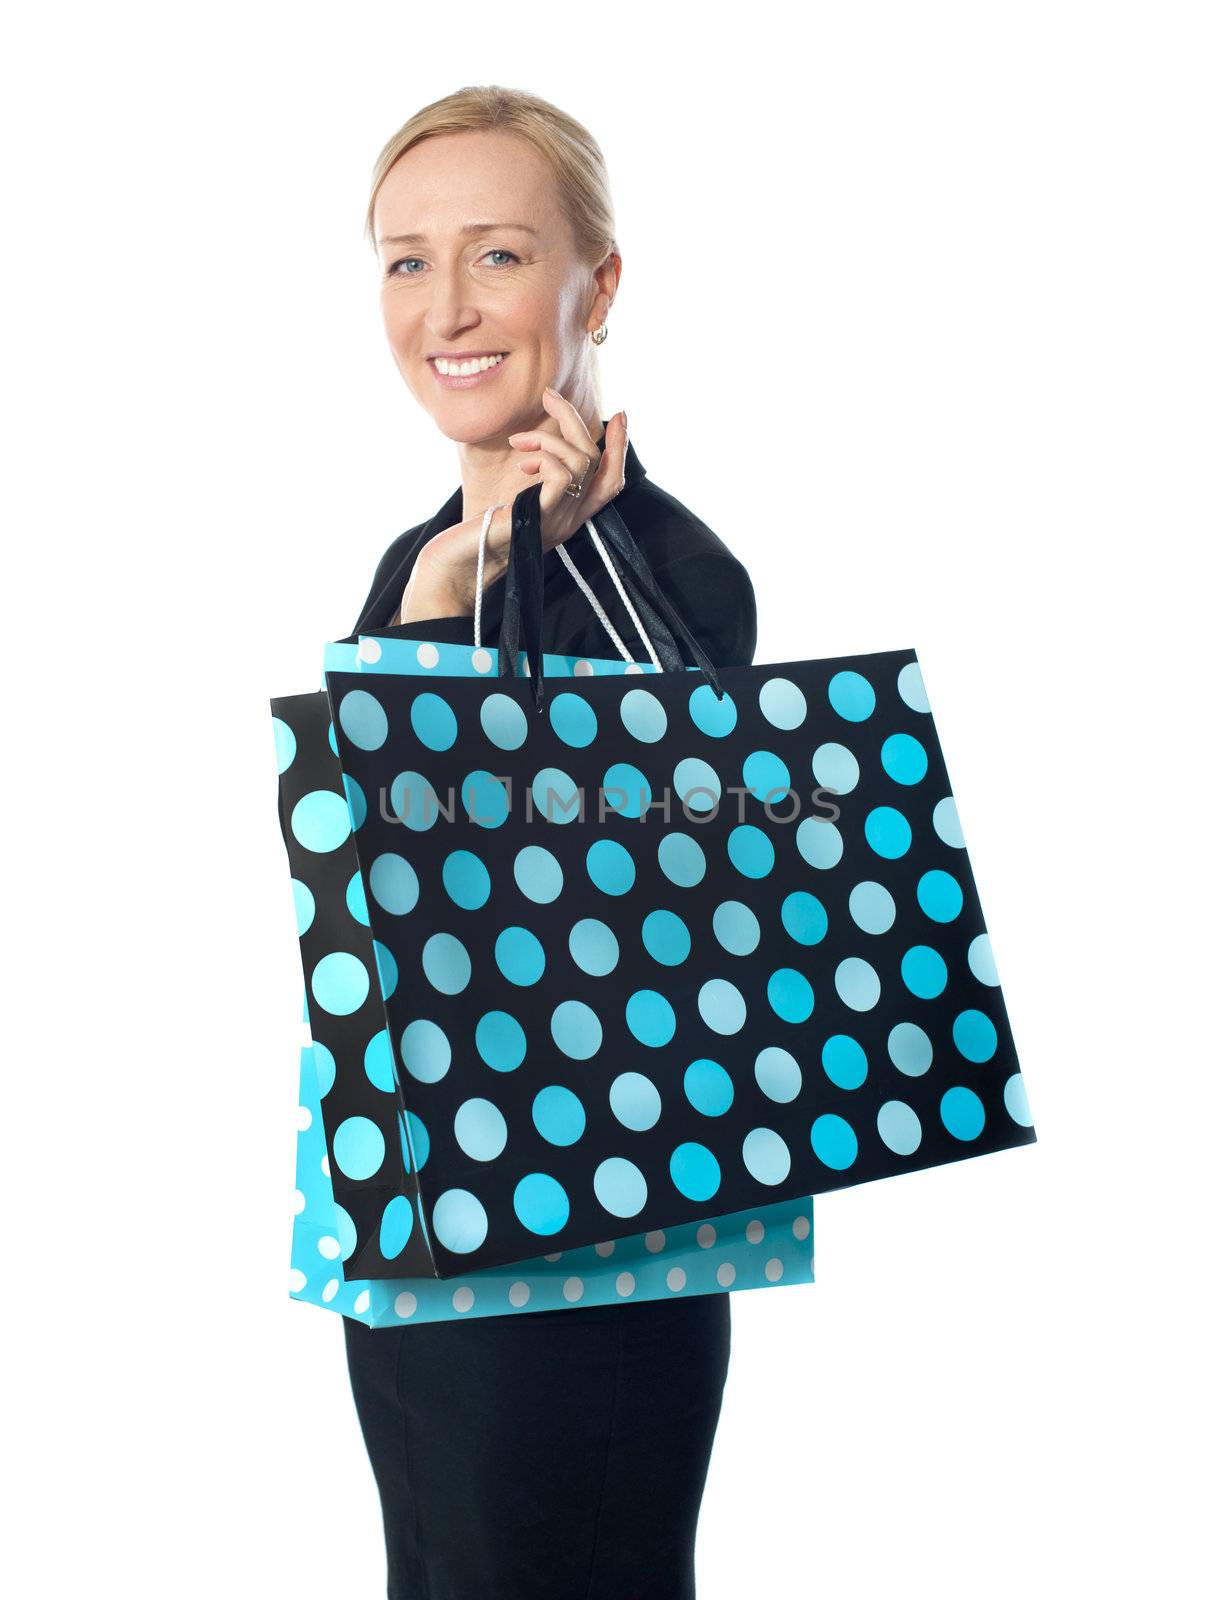 Senior woman posing with dotted shopping bag holding it on her shoulders